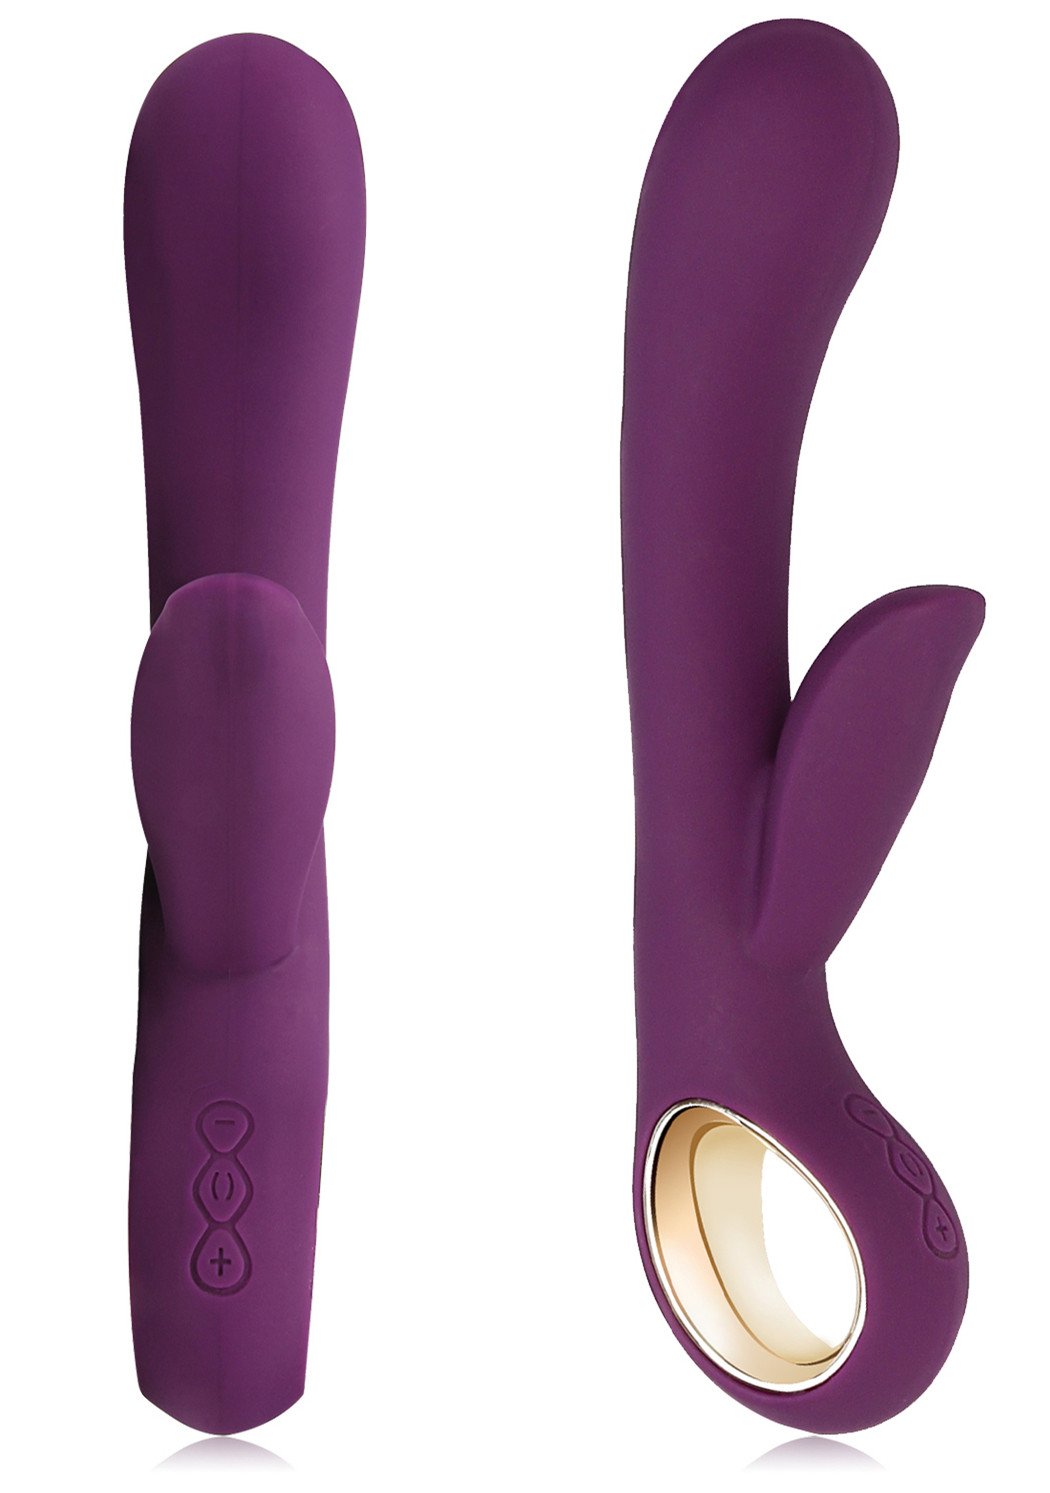 Sexy vibrator pictures